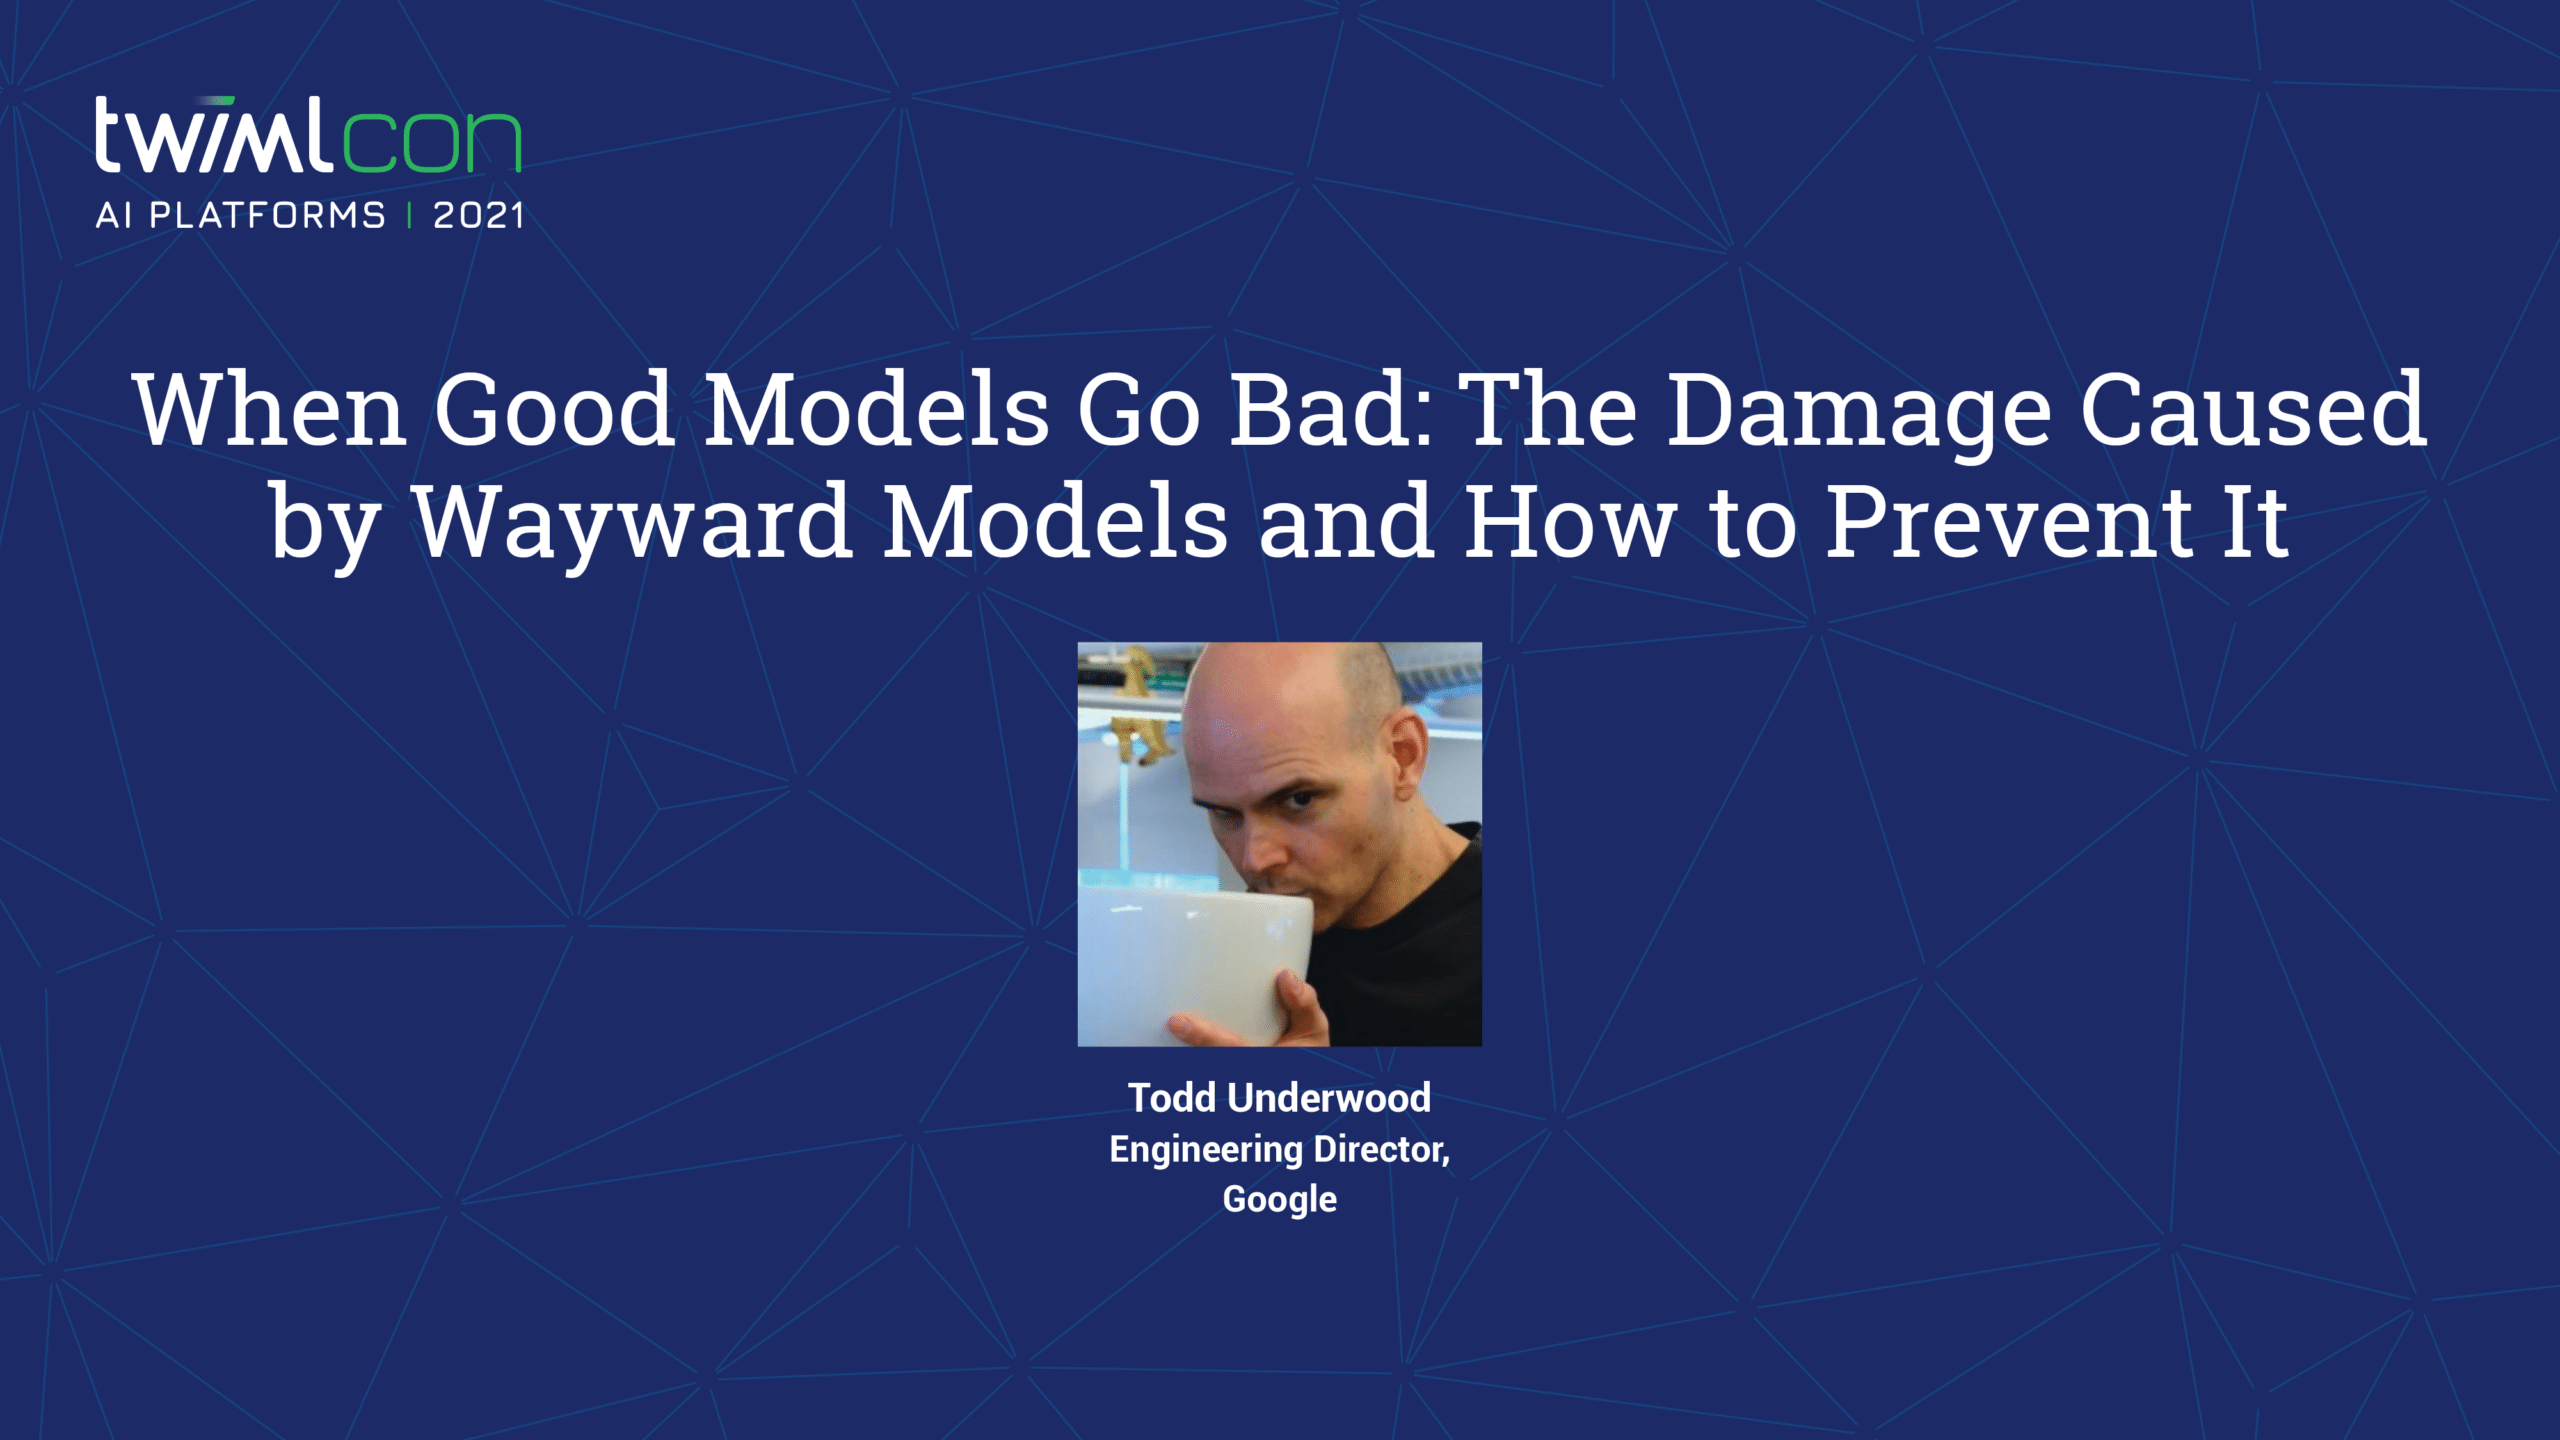 Cover Image: When Good Models Go Bad: The damage caused by wayward models and how to prevent it